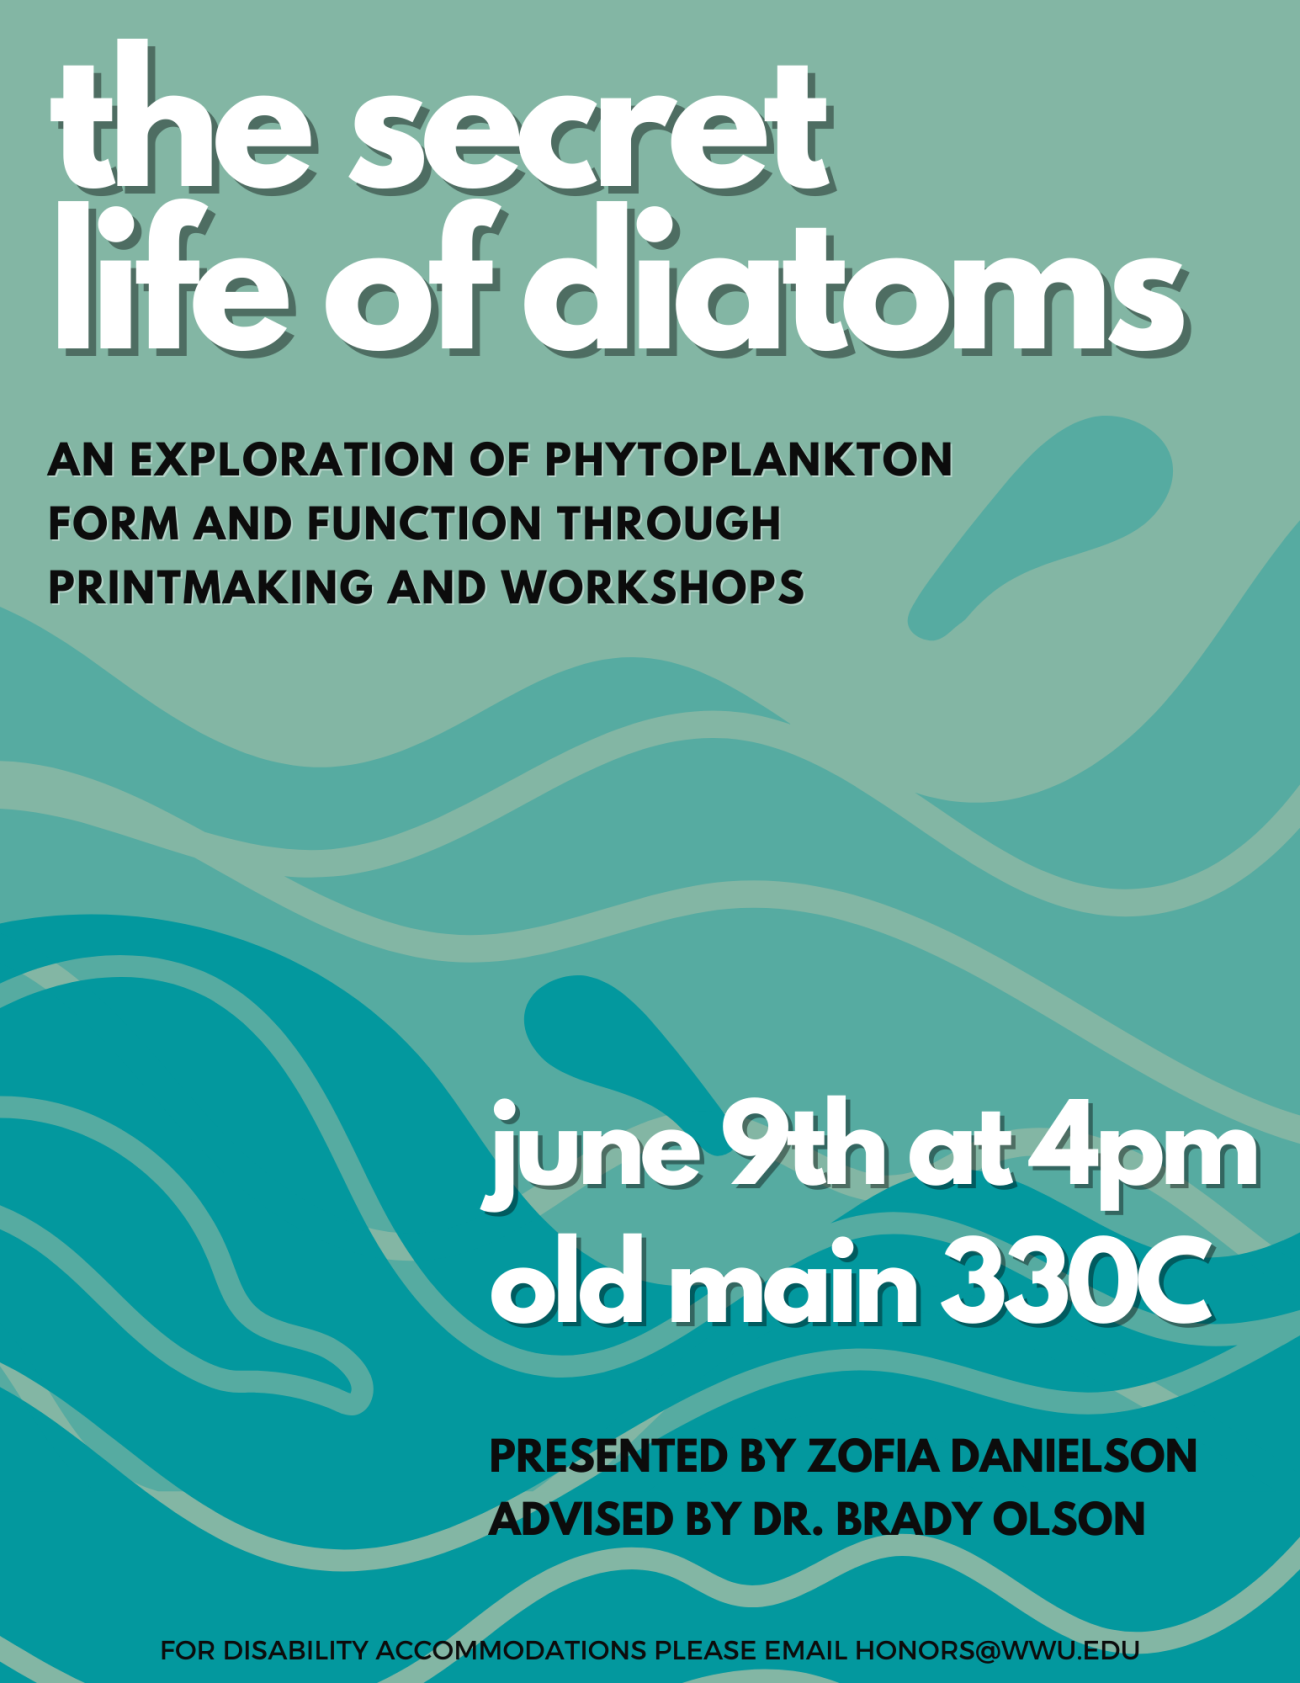 Black and white words in front of turquoise, teal, and light aquamarine wave illustrations. The text reads: "the secret life of diatoms. June 9th at 4pm, Old Main 330C. An exploration of phytoplankton form and function through printmaking and workshops. Presented by Zofia Danielson, advised by Dr. Brady Olson. For disability accommodations please email honors@wwu.edu."